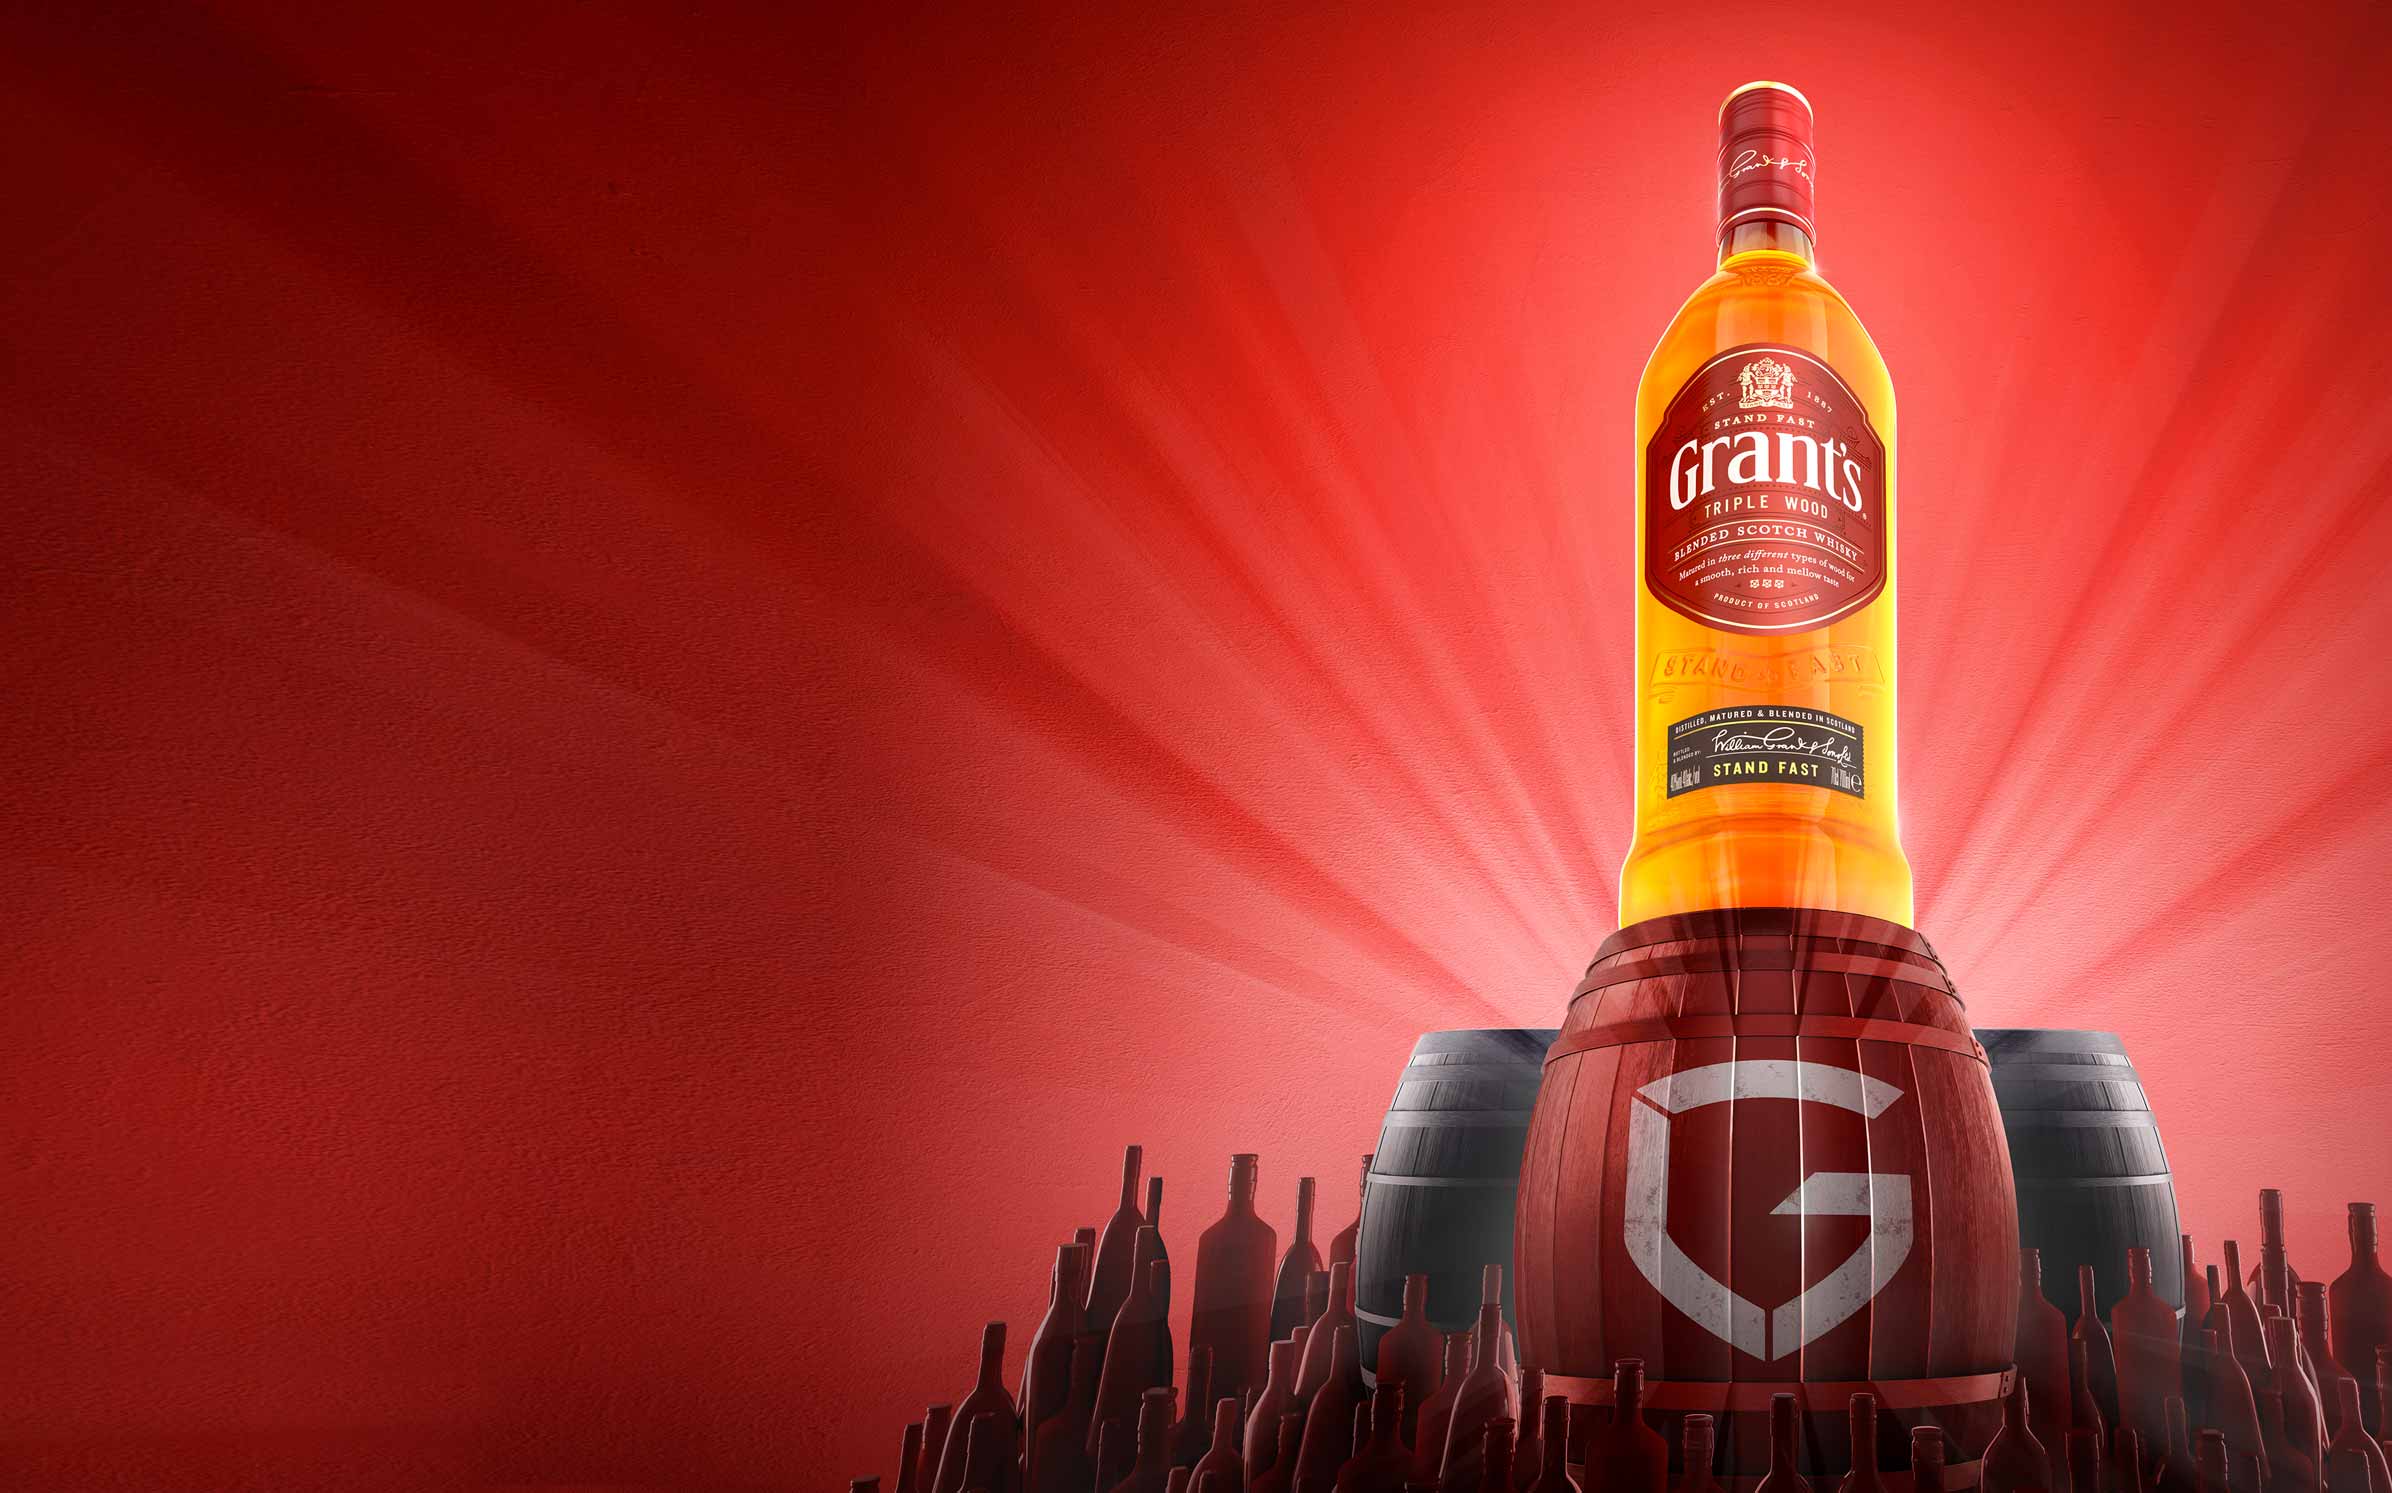 Grant's Triple Wood Blended Scotch Whisky | Grant's Whisky